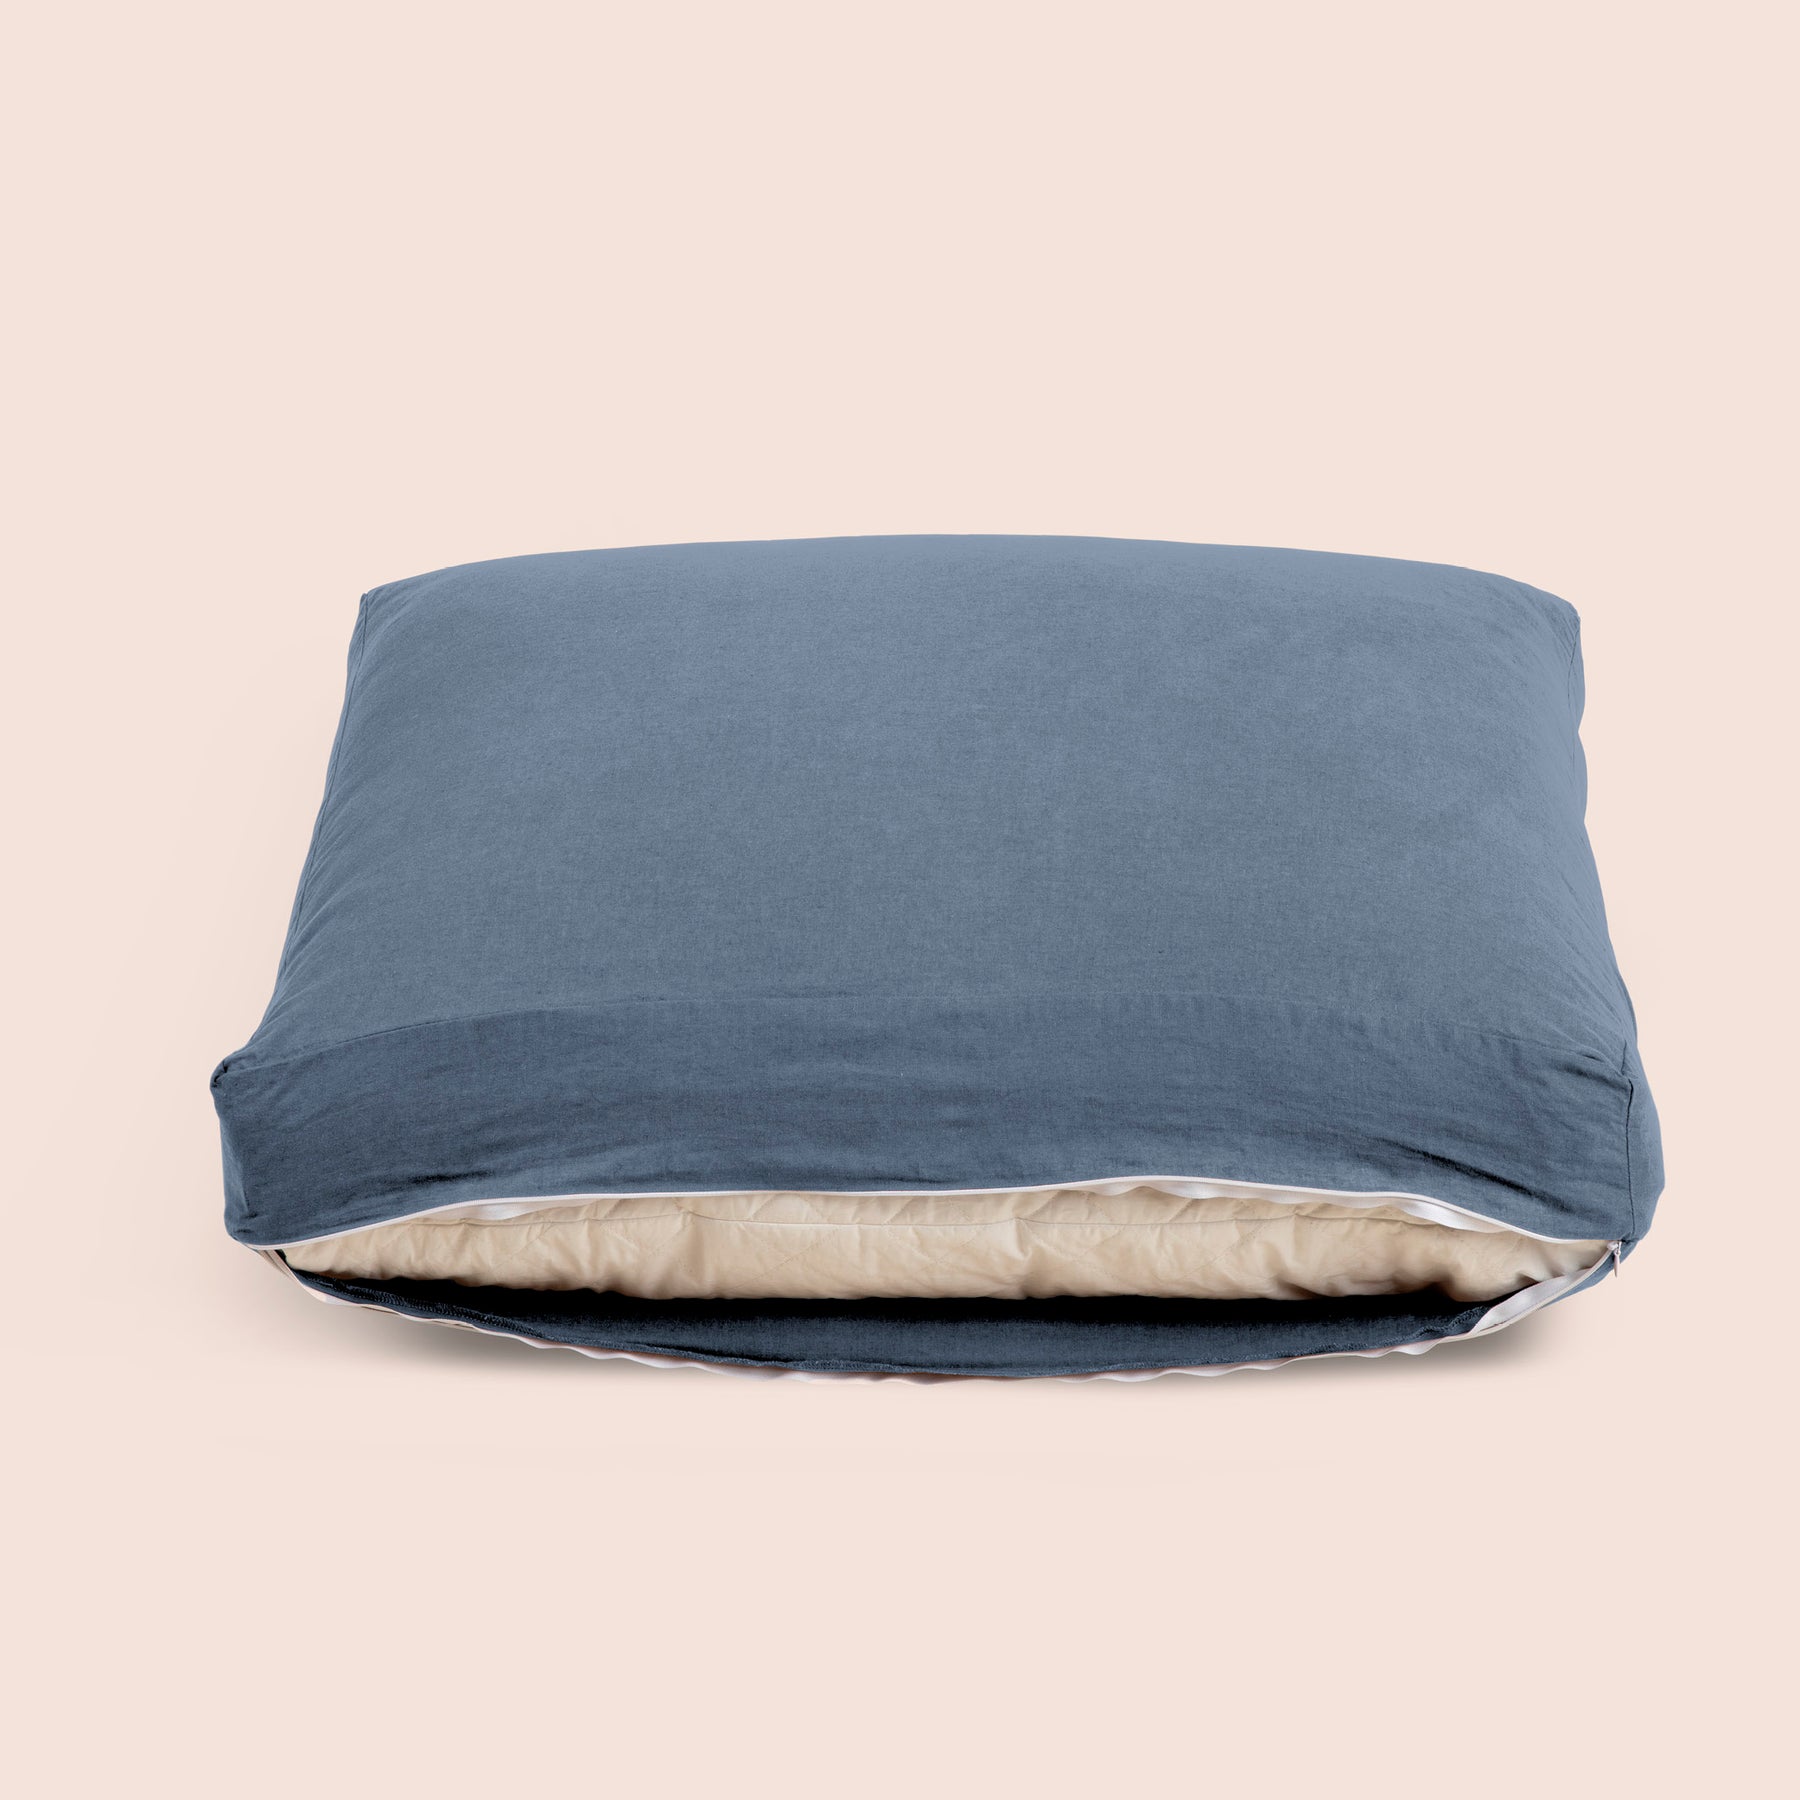 Image of Catalina Blue Blended Linen Meditation Cushion Cover showcasing an open zipper with a meditation cushion inside on a light pink background 